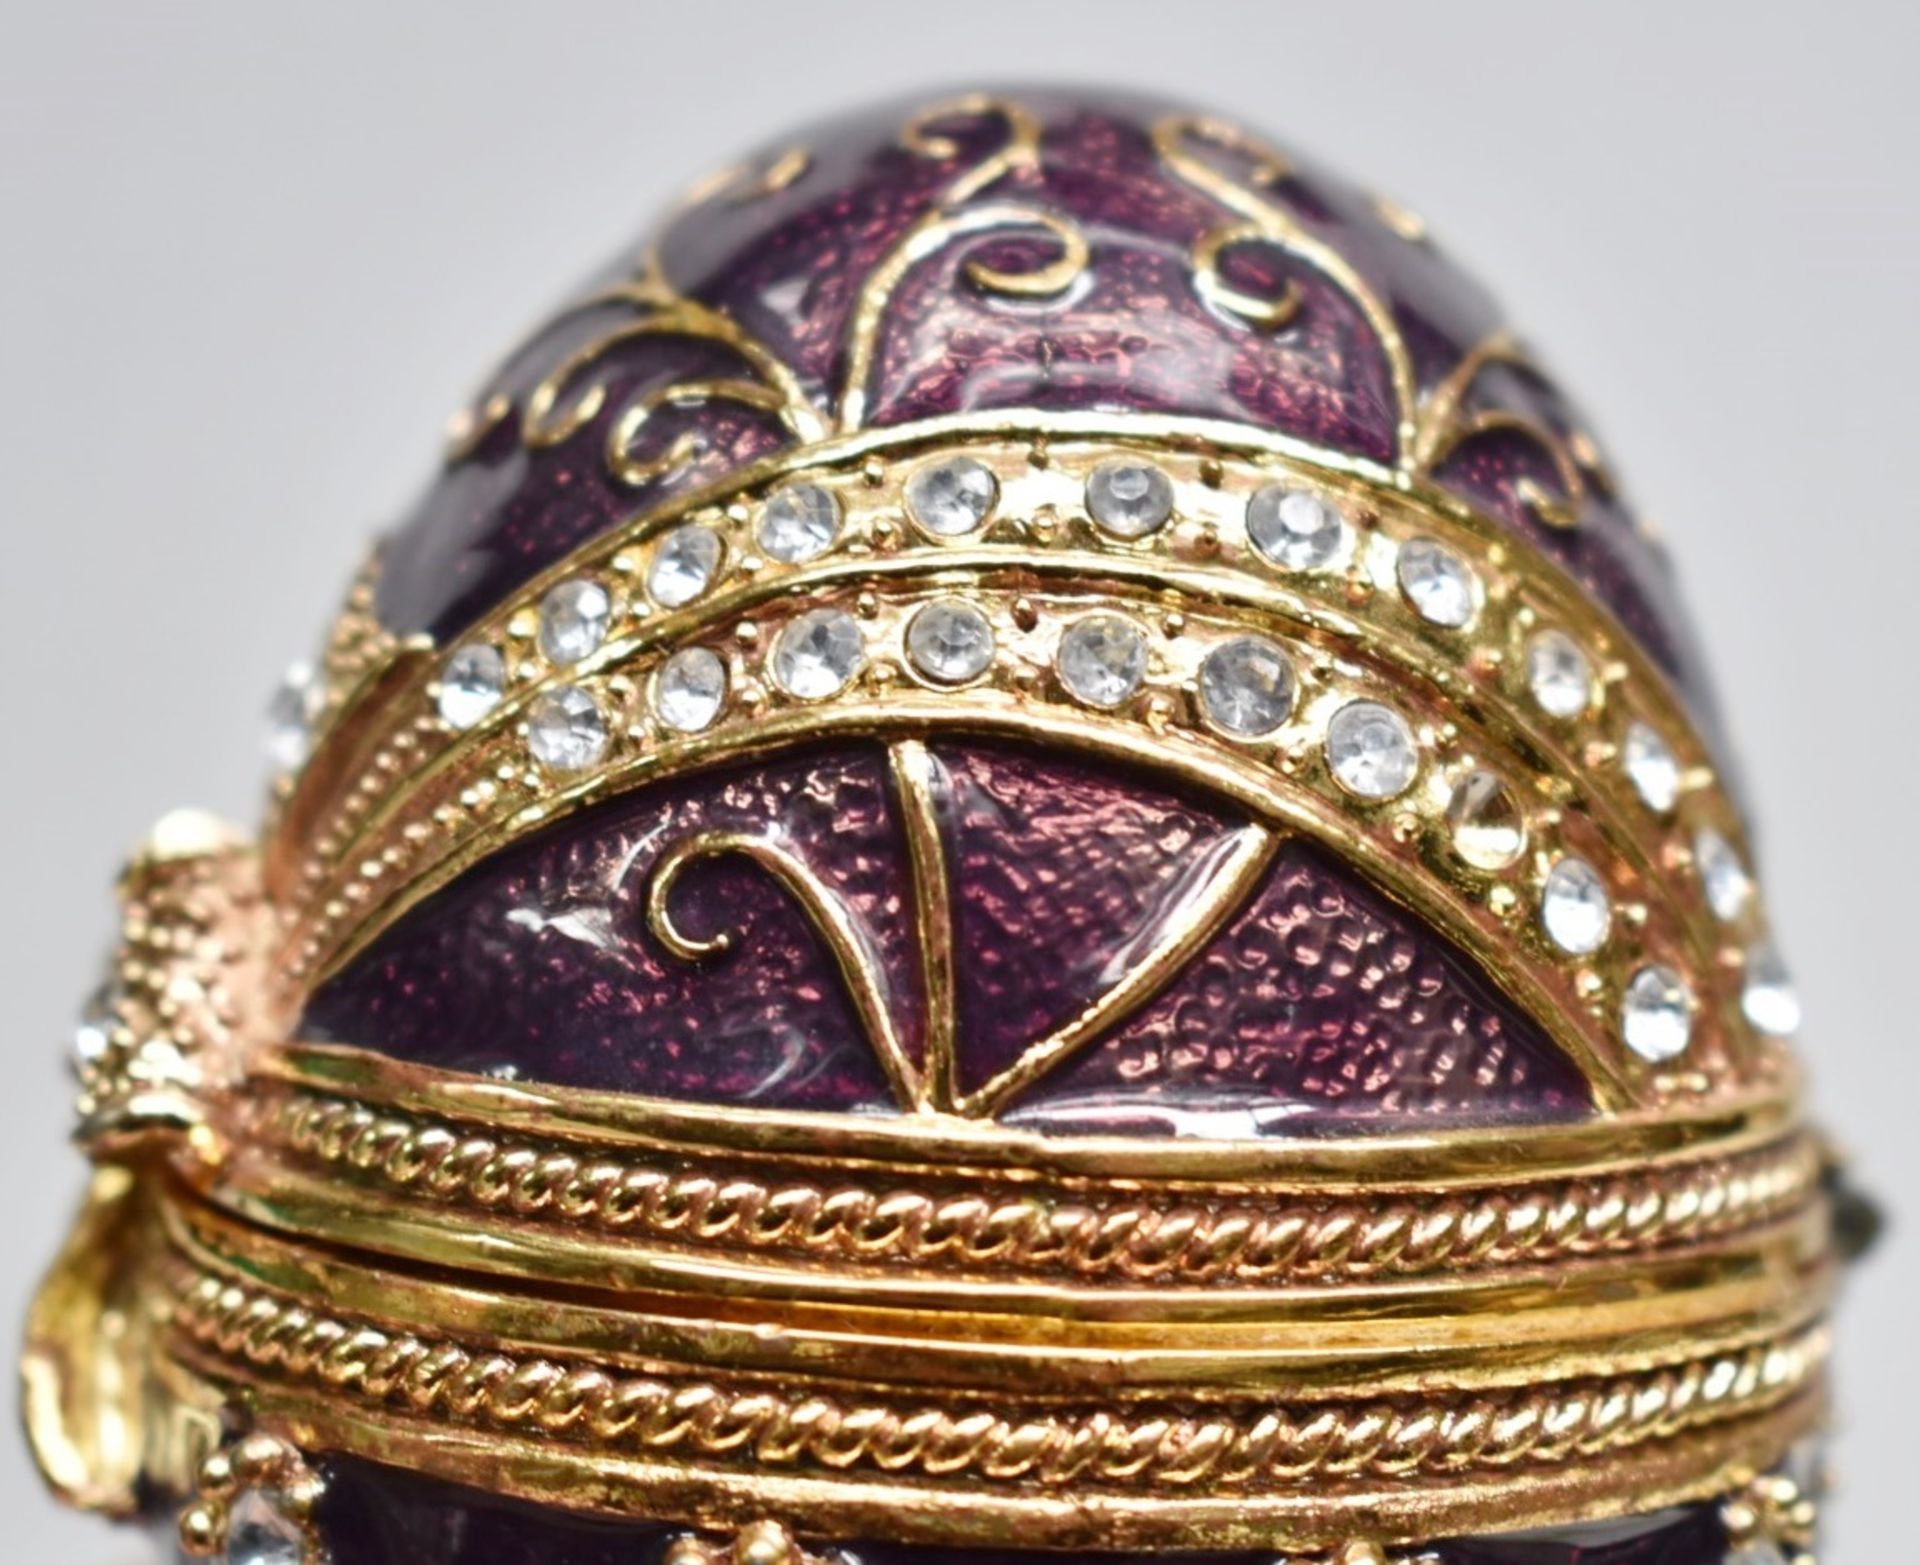 1 x Decorative Faberge-Style Clockwork Musical Enameled Egg, In Purple - Ref: CNT733/WH2/C23 - CL845 - Image 4 of 4